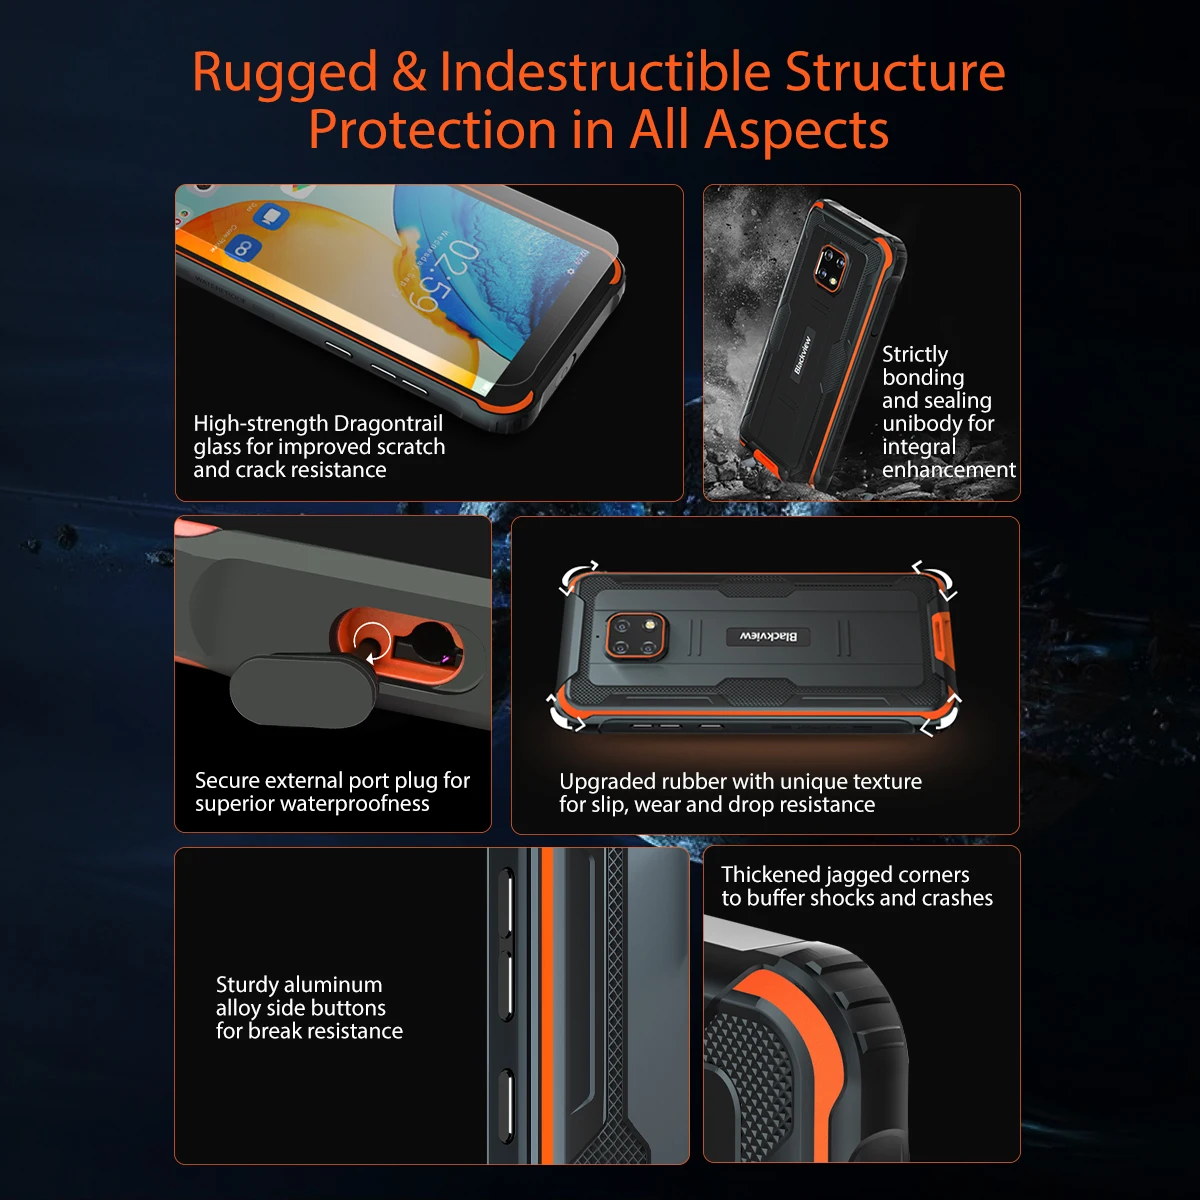 blackview bv4900s rugged smartphone ip68 waterproof cellphones 2gb 32gb android 11 octa core mobile phone 5580mah 5 7 inch phone free global shipping